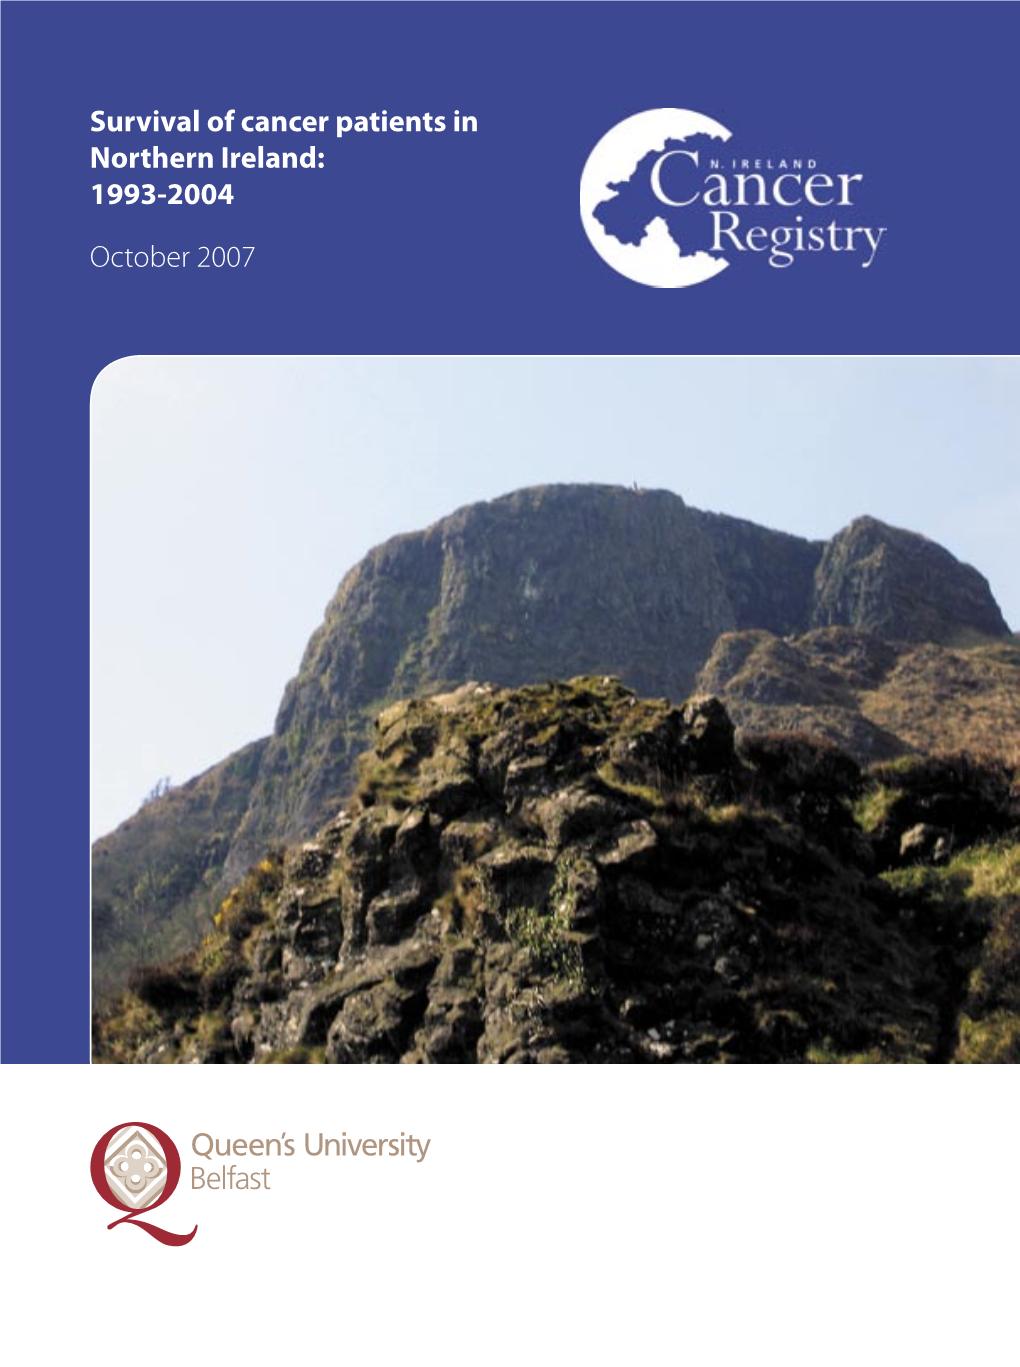 Survival of Cancer Patients in Northern Ireland: 1993-2004